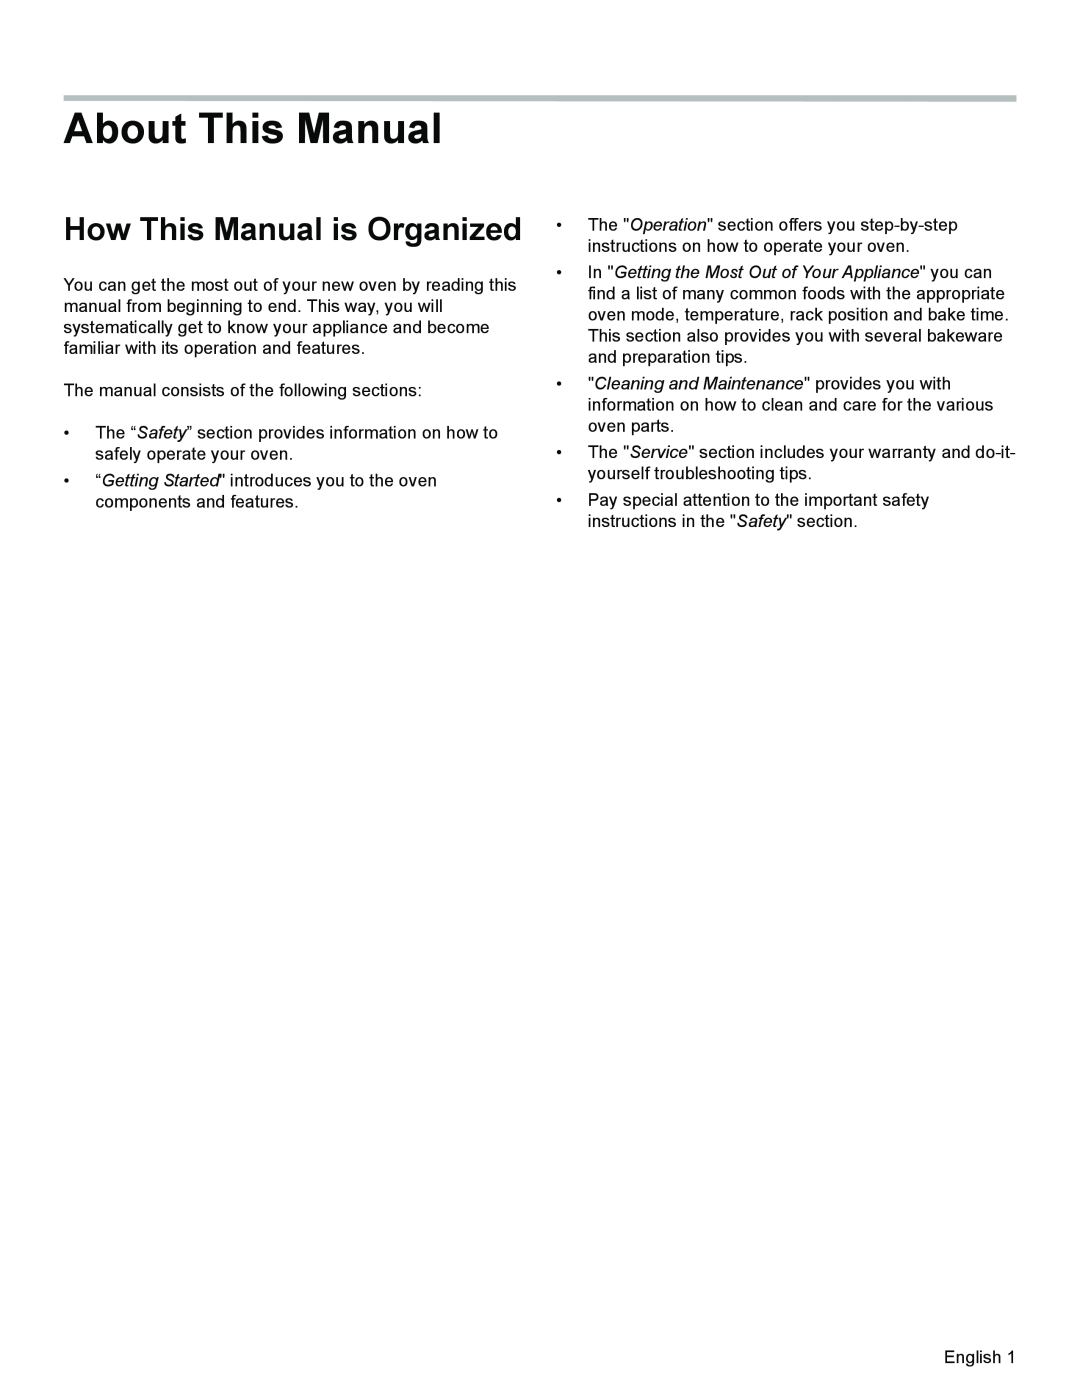 Bosch Appliances HES3053U manual About This Manual, How This Manual is Organized 